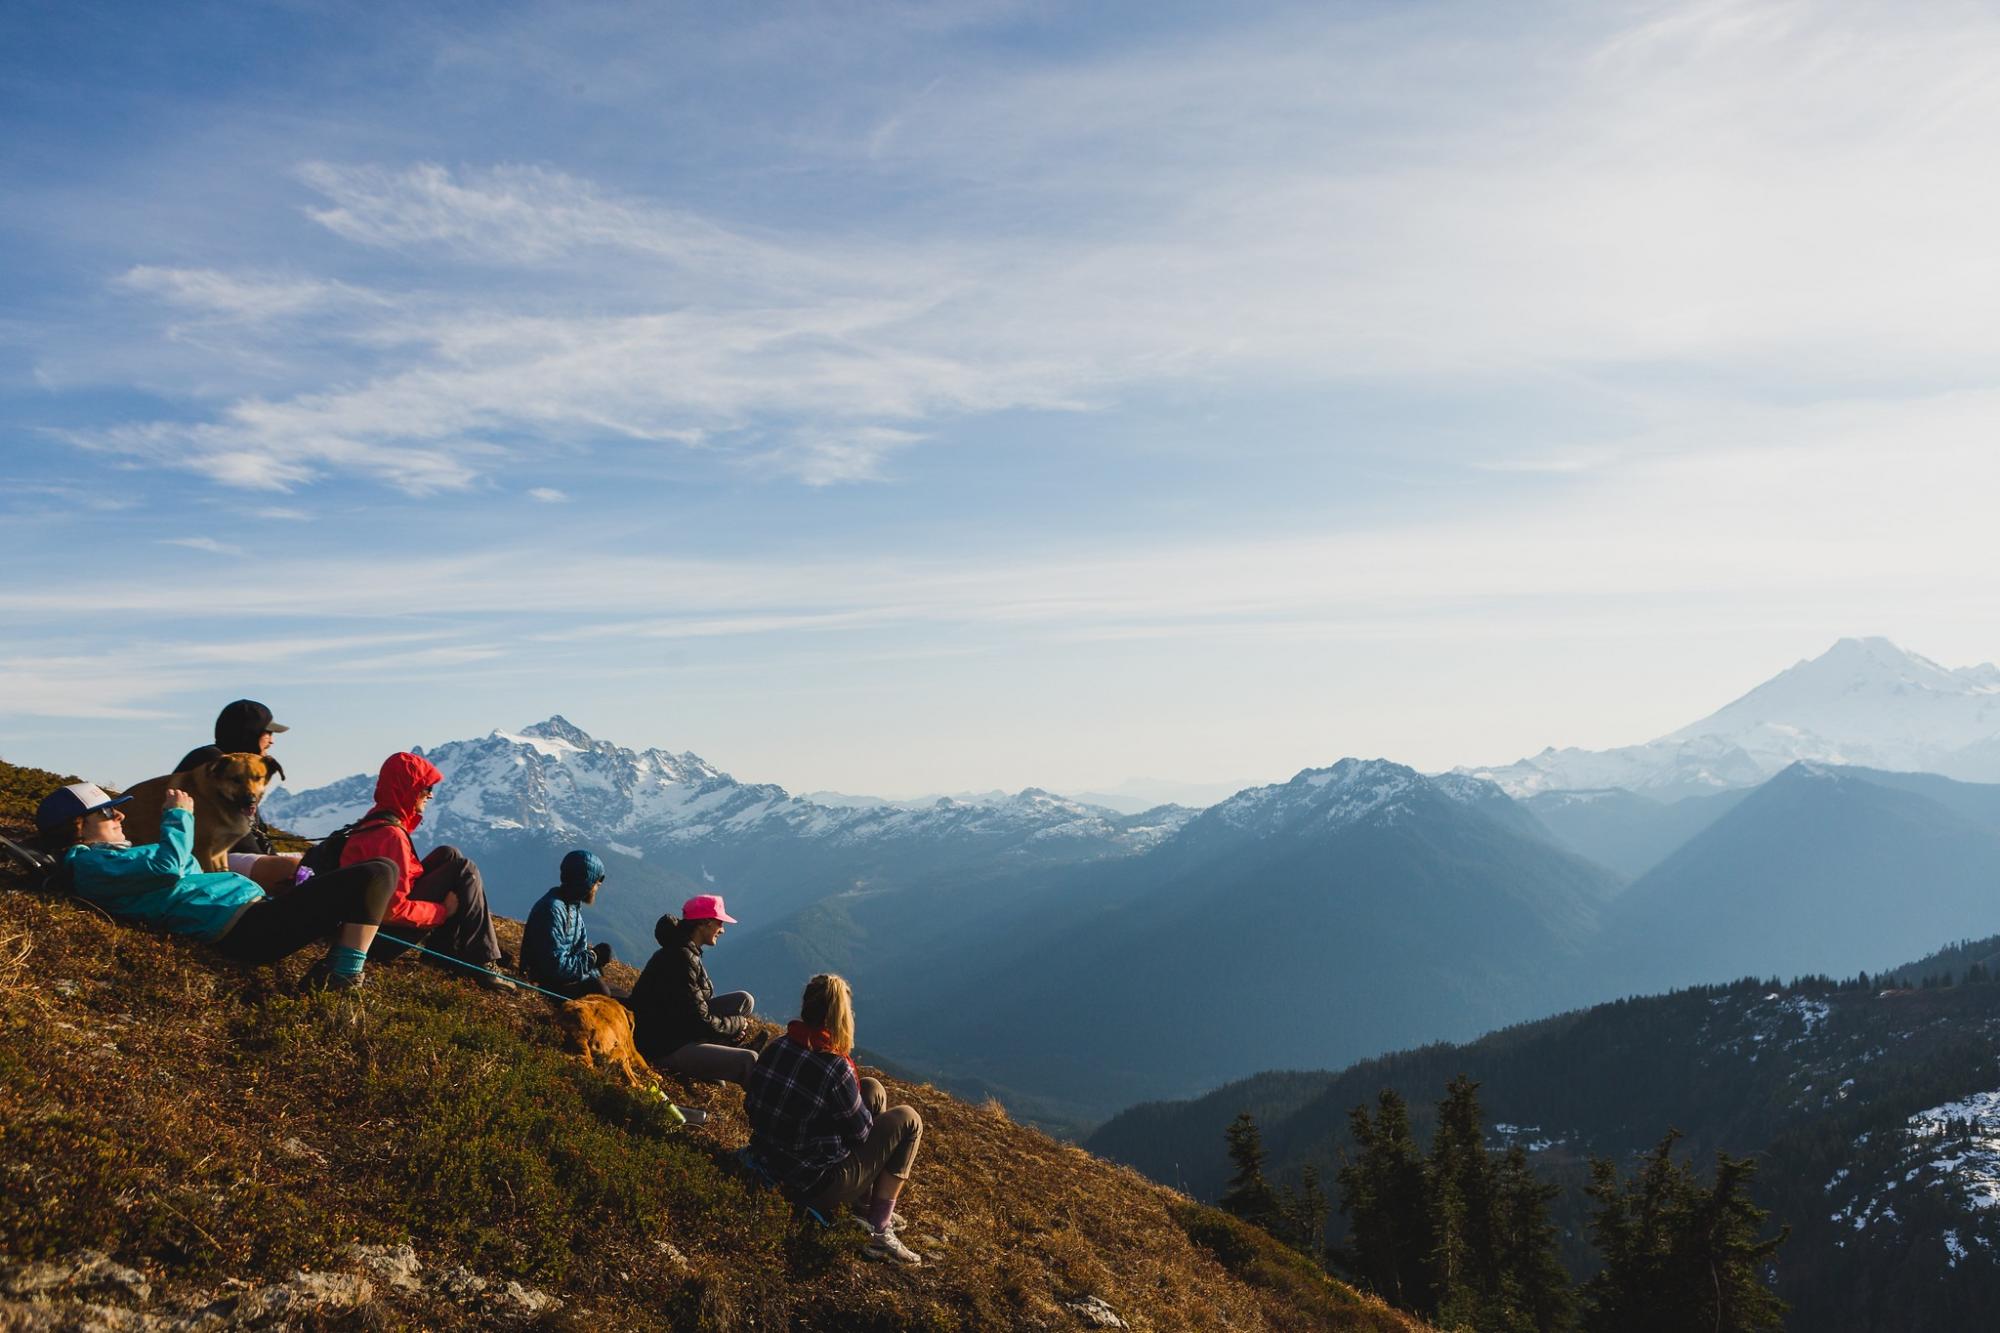 Students sitting on the summit of a mountain looking over a valley to the next mountain range